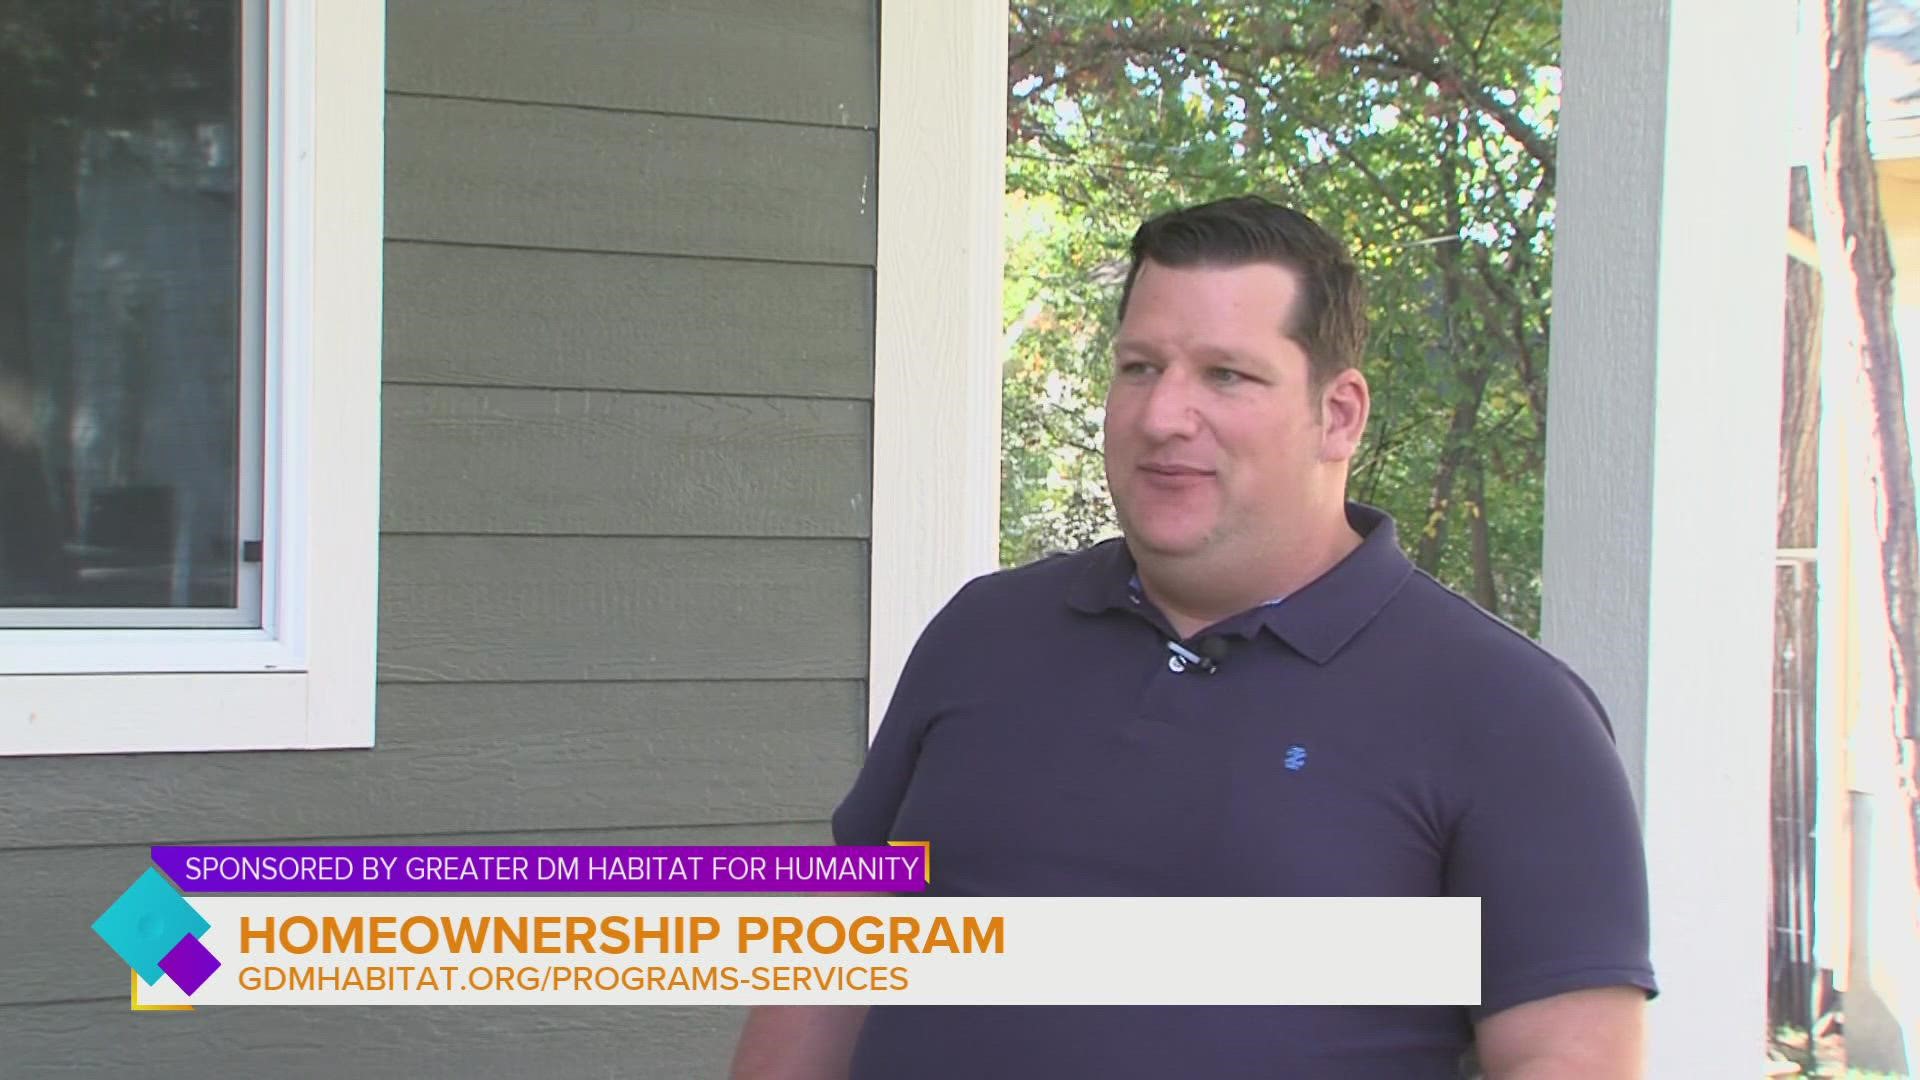 Dan Warfel, Director of Family Services-GDM Habitat for Humanity, has details on the FINAL Homeownership Program Application Deadline for 2021 | Paid Content